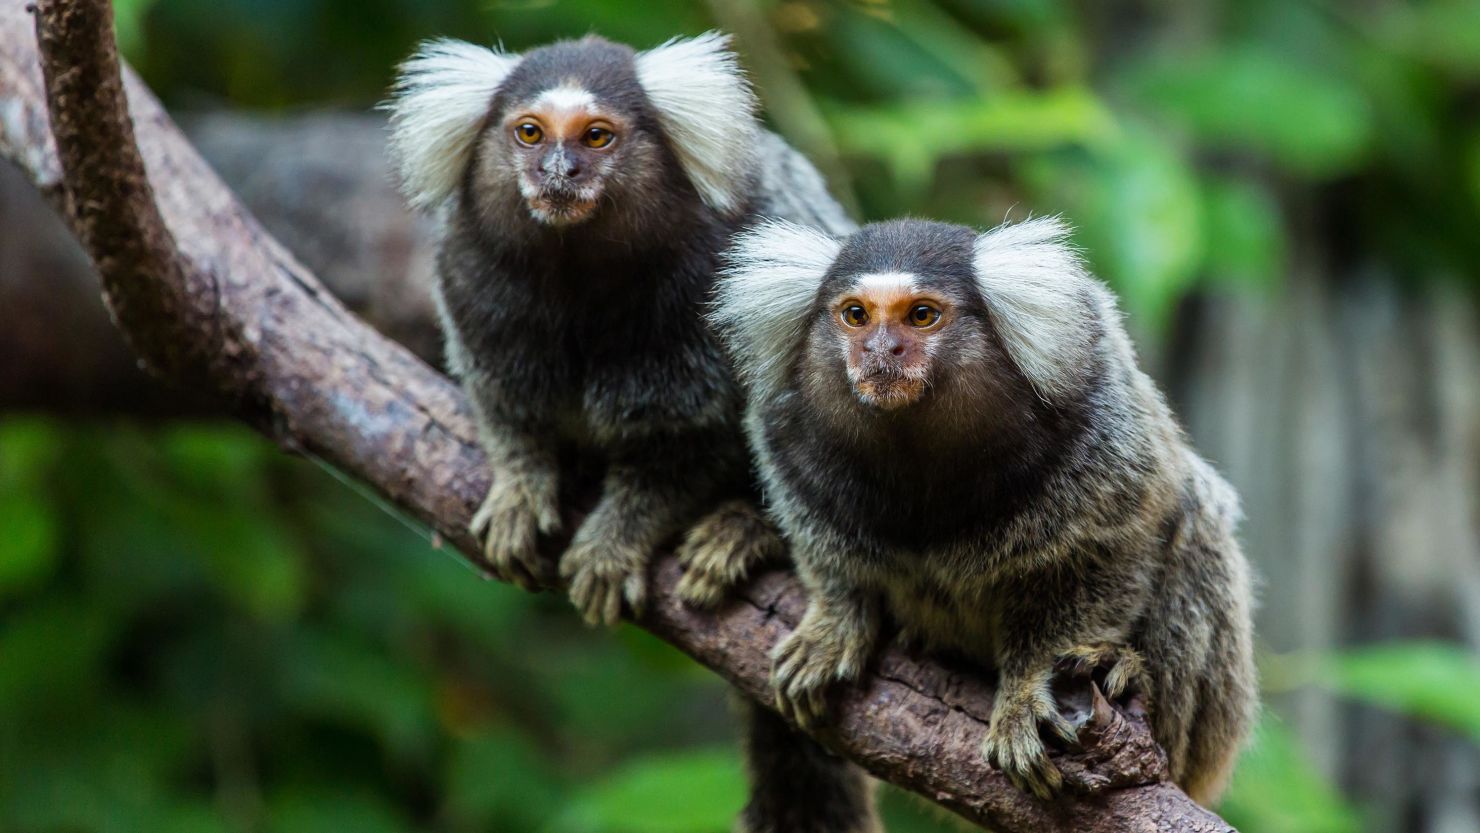 Marmosets "understood" recordings of vocal interactions between other monkeys.